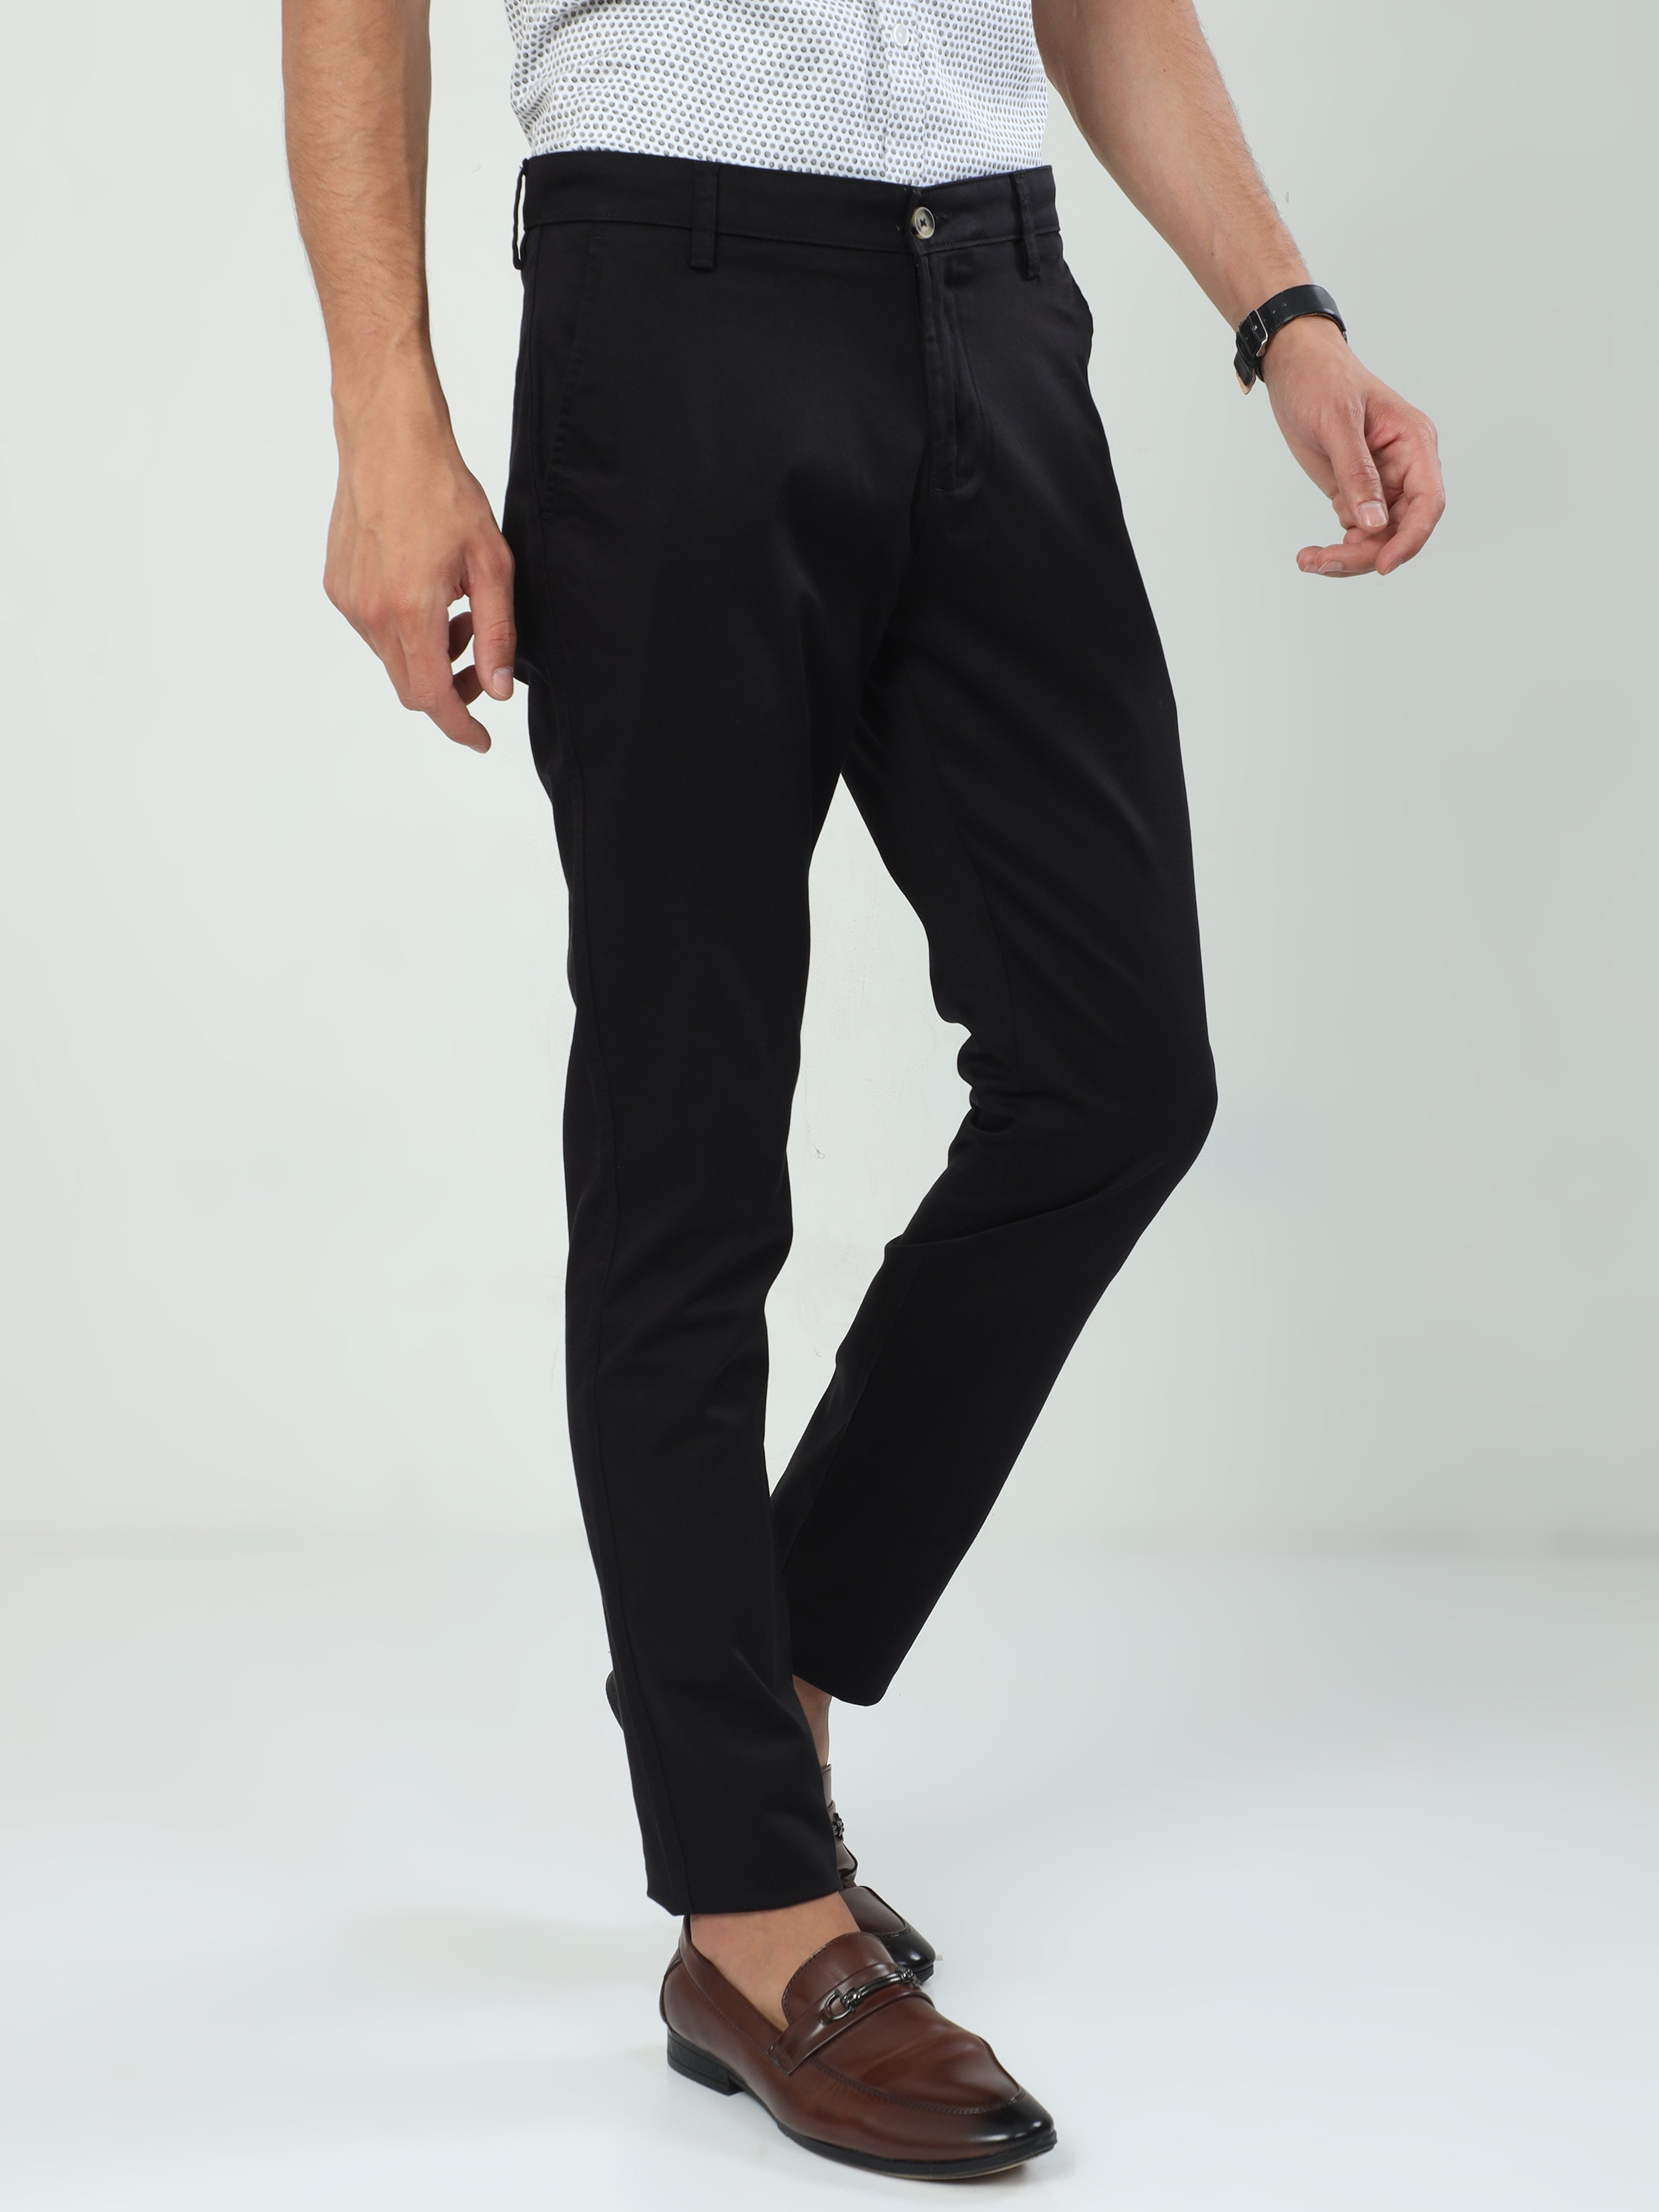 Trousers for Men | Formal, Casual, Joggers, Chinos & More